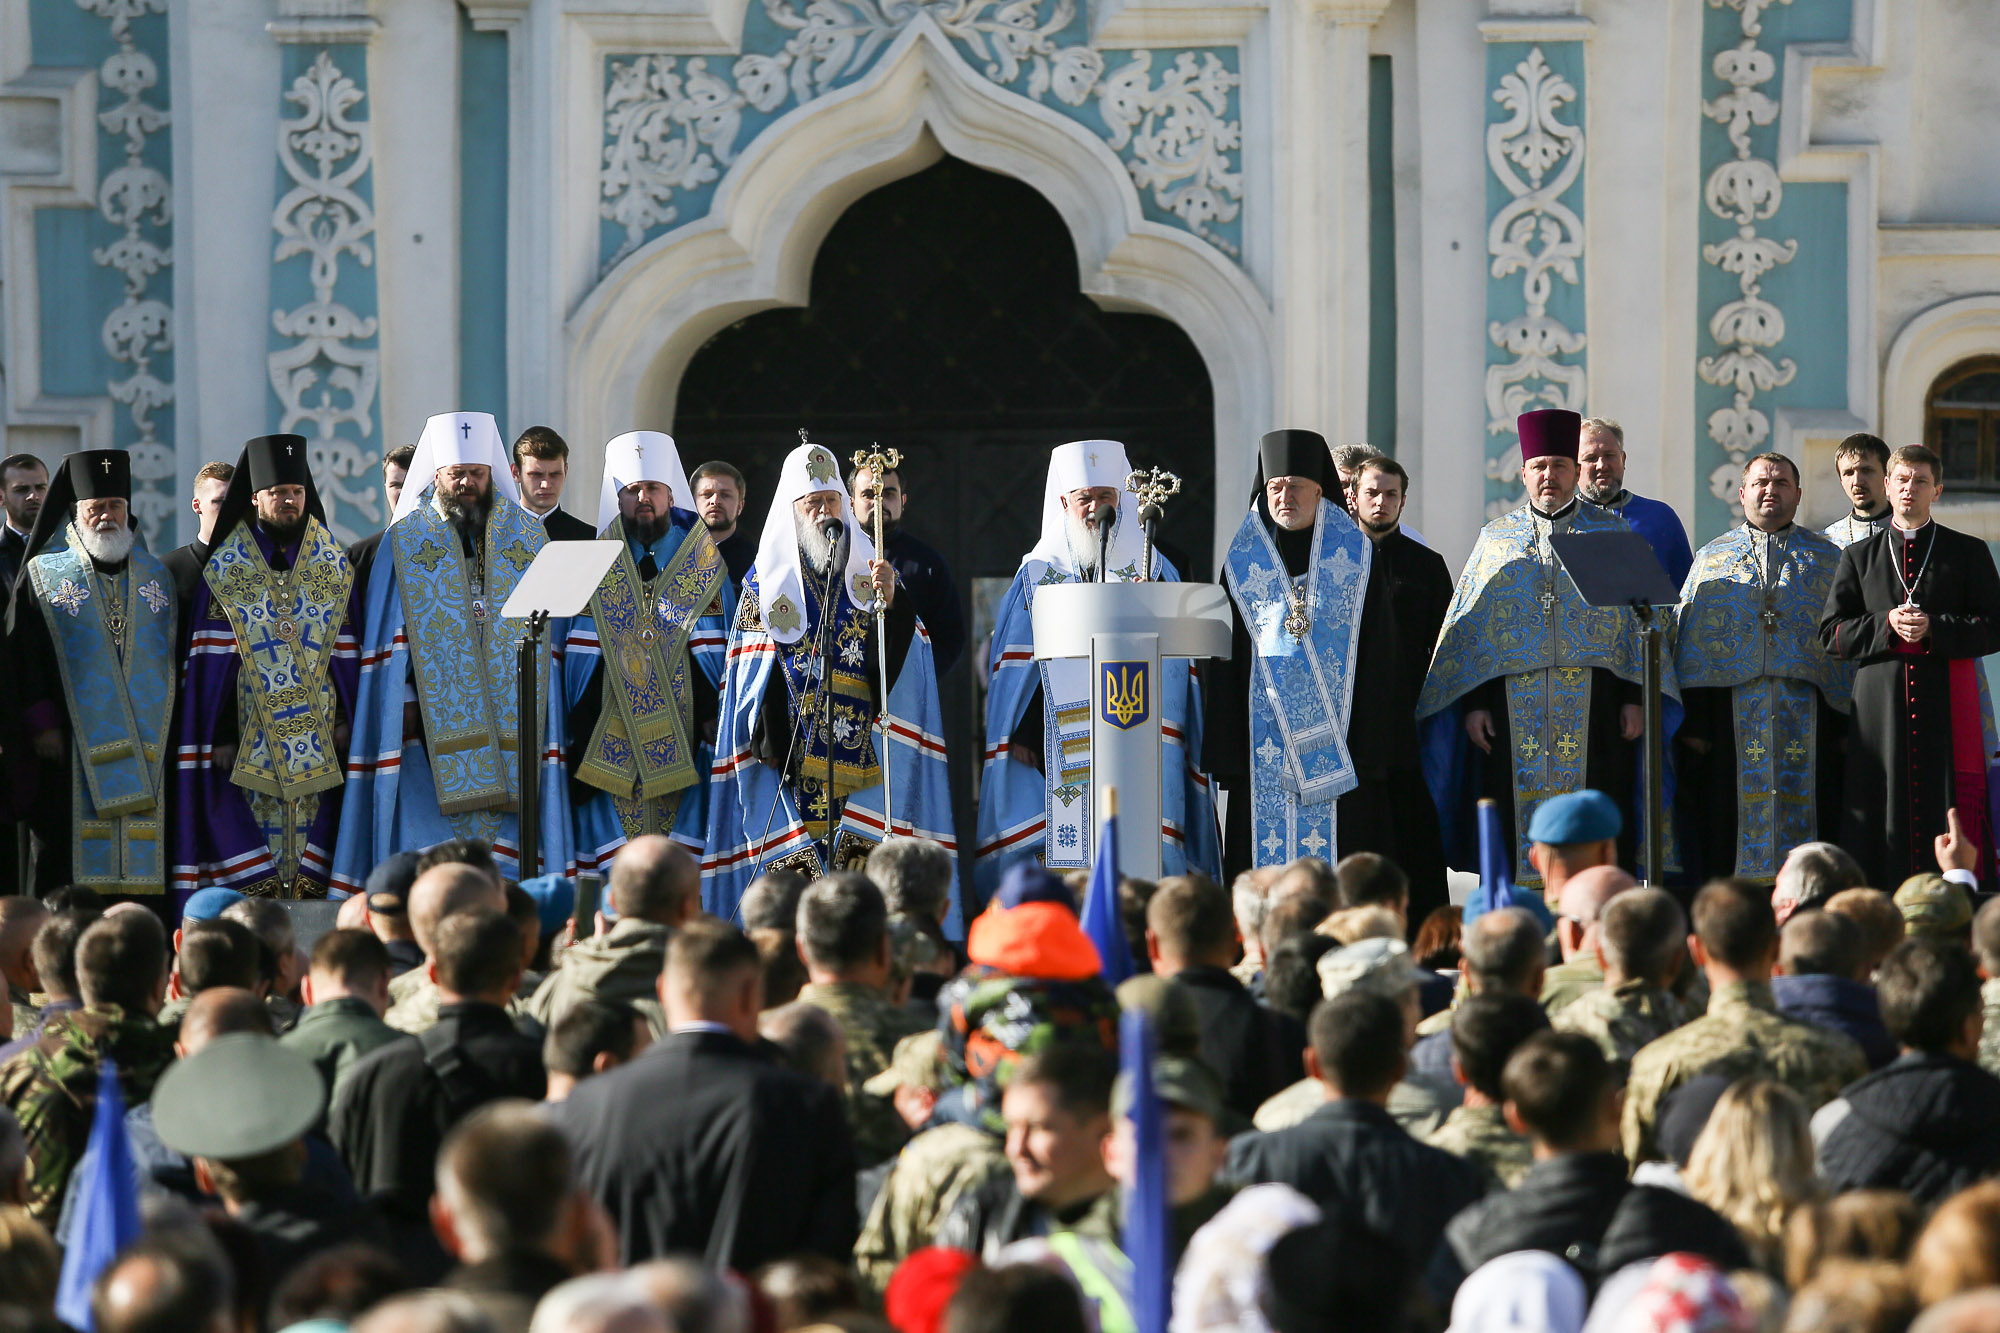 Ukraine thanks Ecumenical Patriarchate for supporting independence of Ukrainian Orthodox Church (PHOTOS) - Oct. 14, 2018